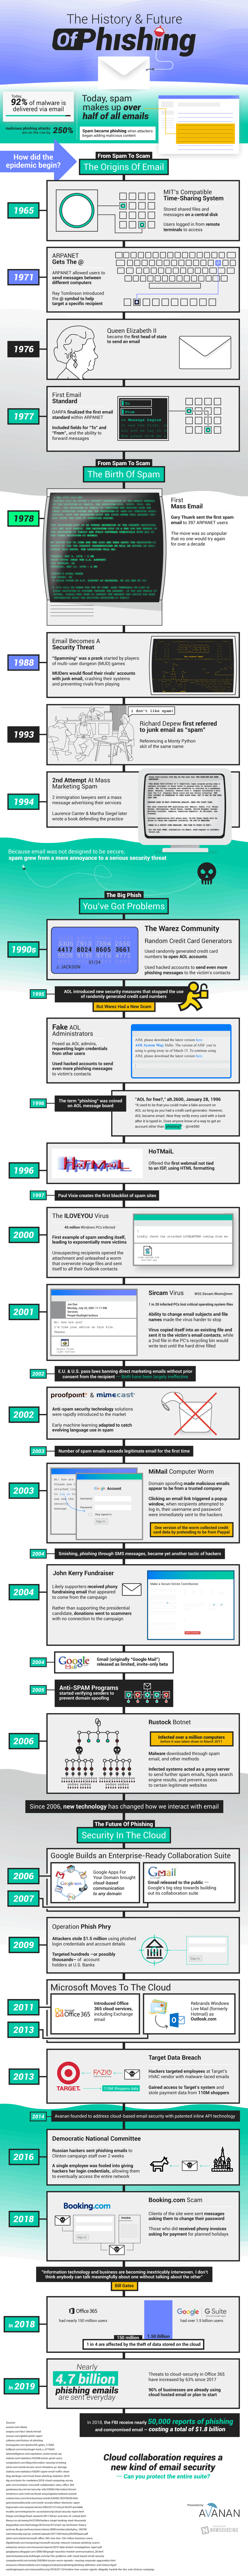 The History and Future of Phishing